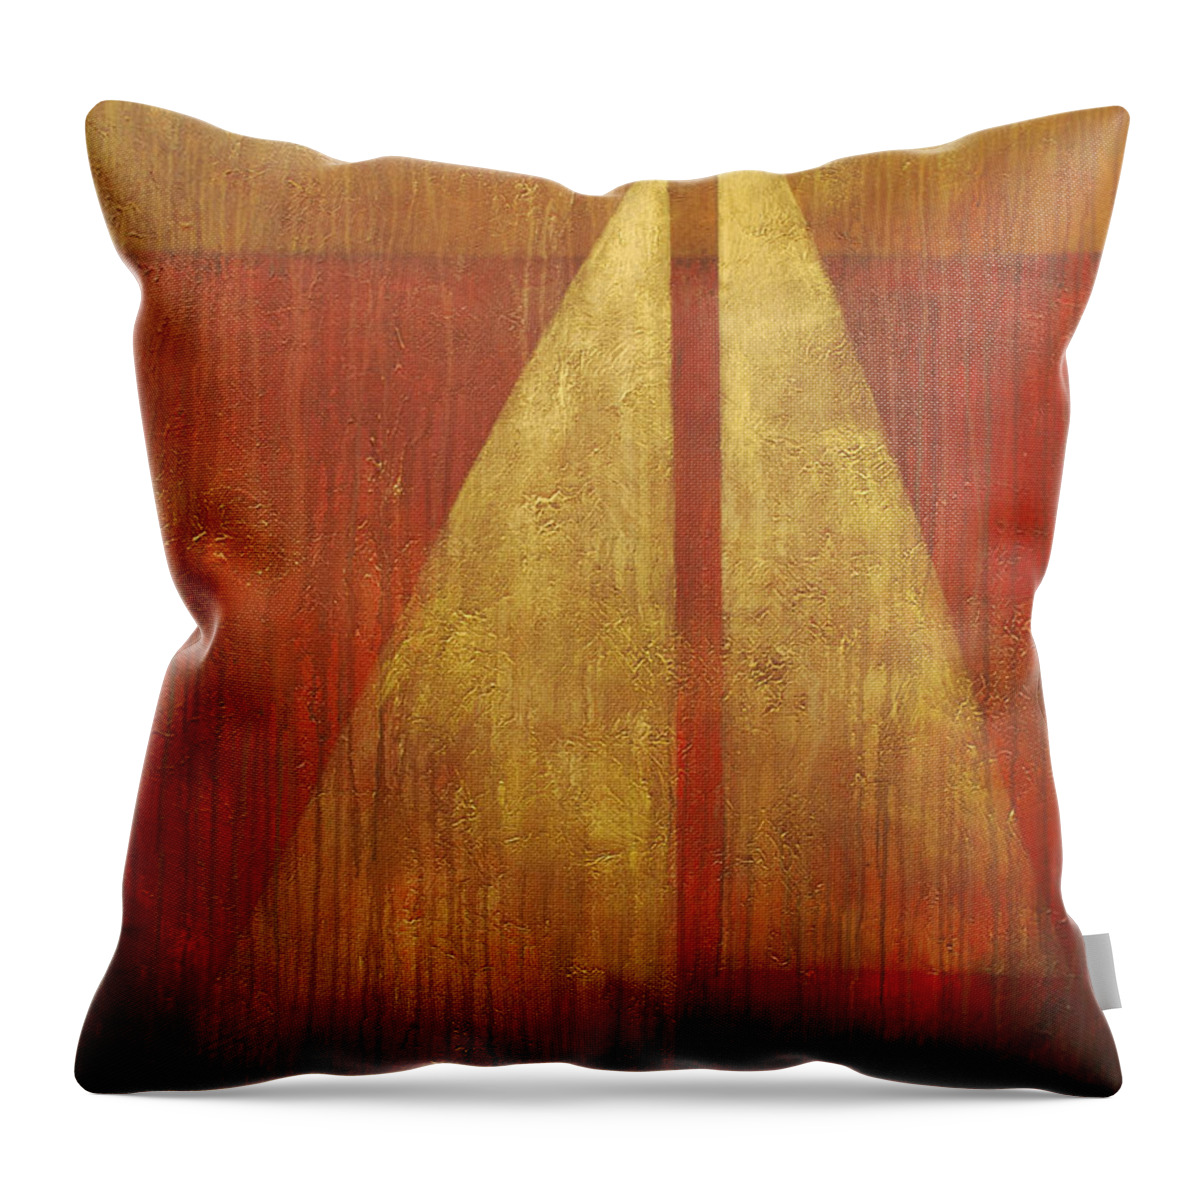 Sailing Throw Pillow featuring the painting Abstract Sail by Glenn Pollard